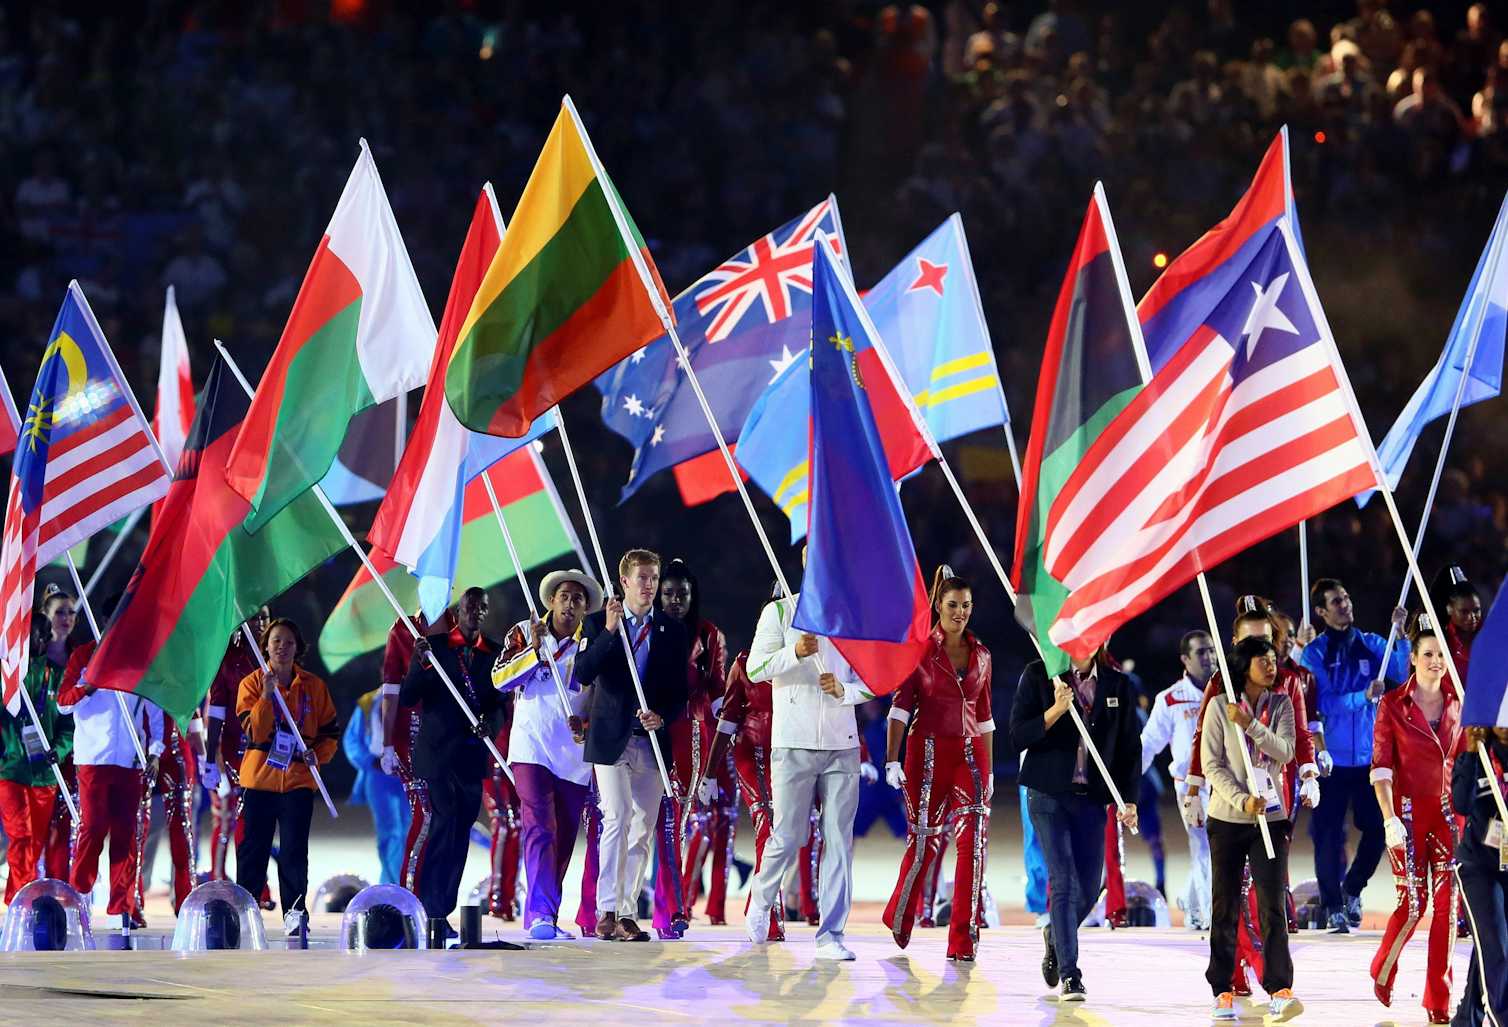 The Olympic closing ceremony celebrates the myth of nations